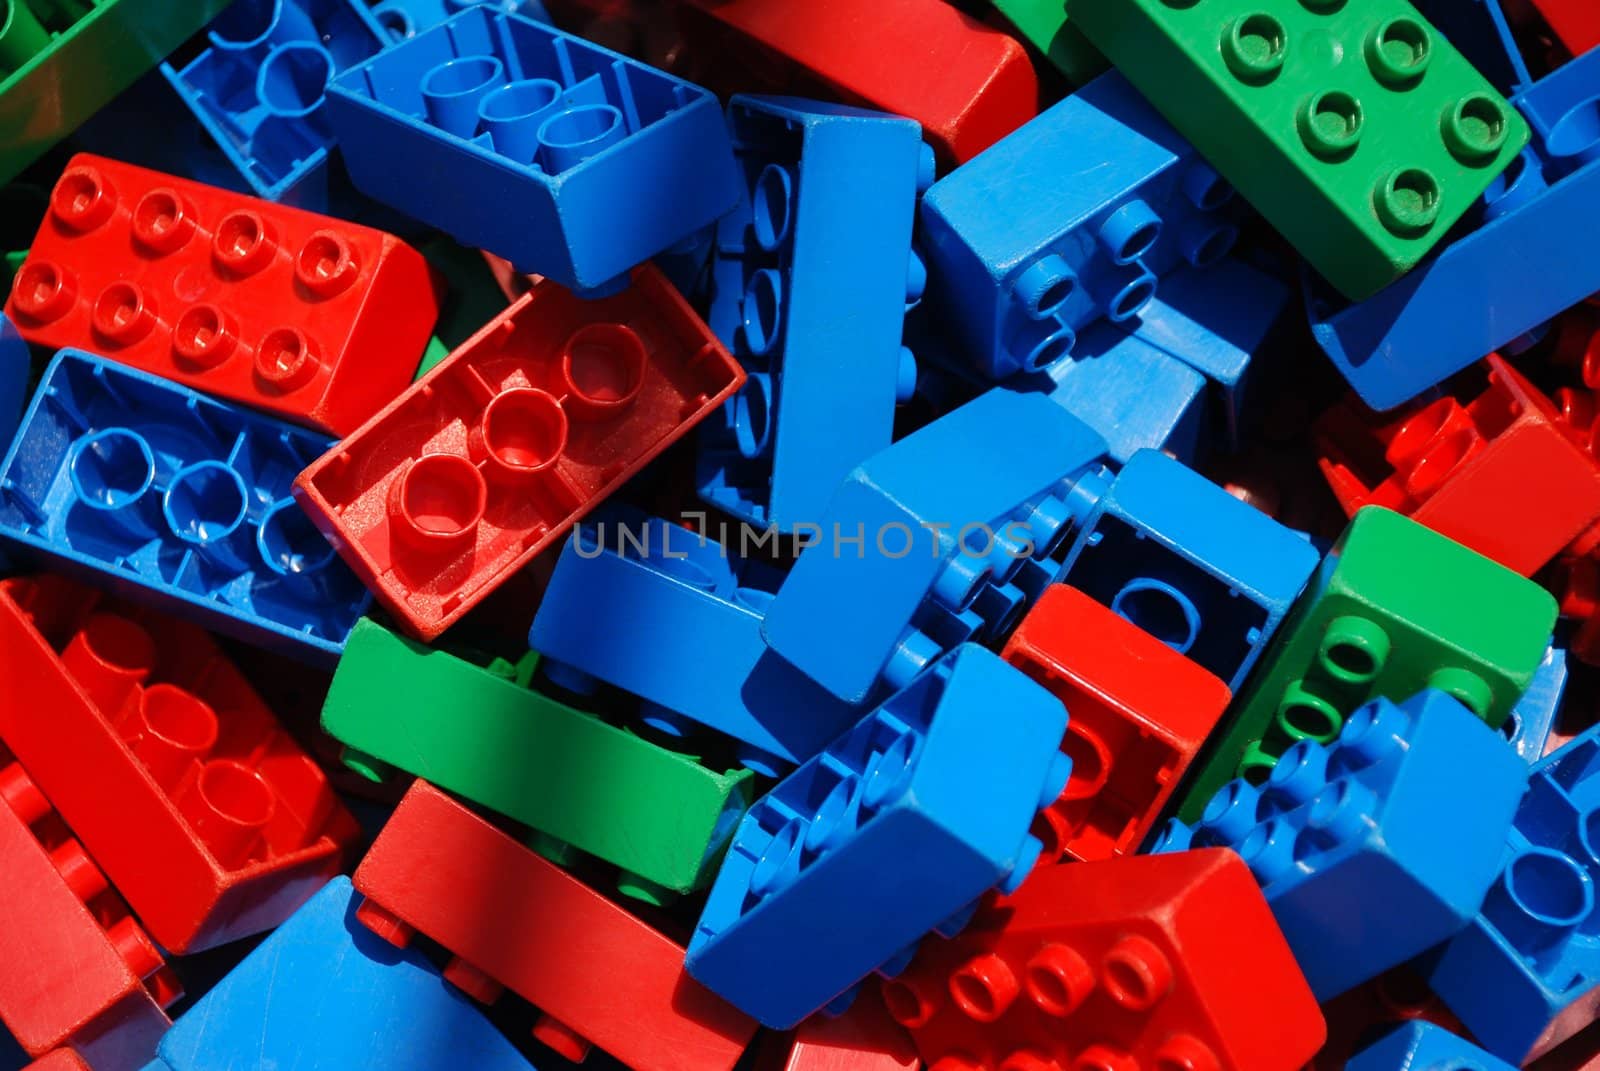 Colorful Pile of Children's Building Blocks by pixelsnap